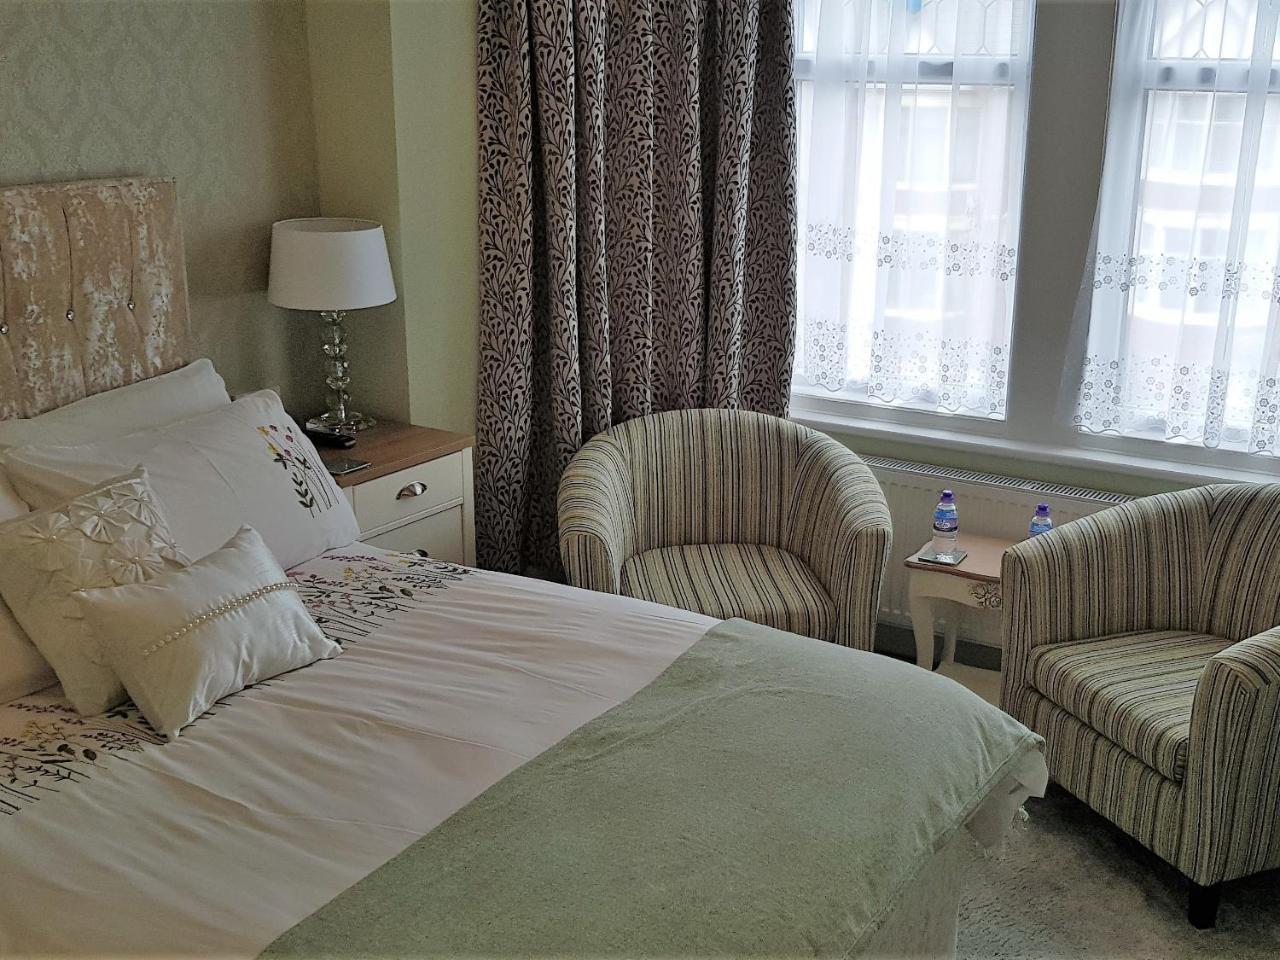 Bed and Breakfast Courtneys Of Gynn Square Blackpool Zimmer foto